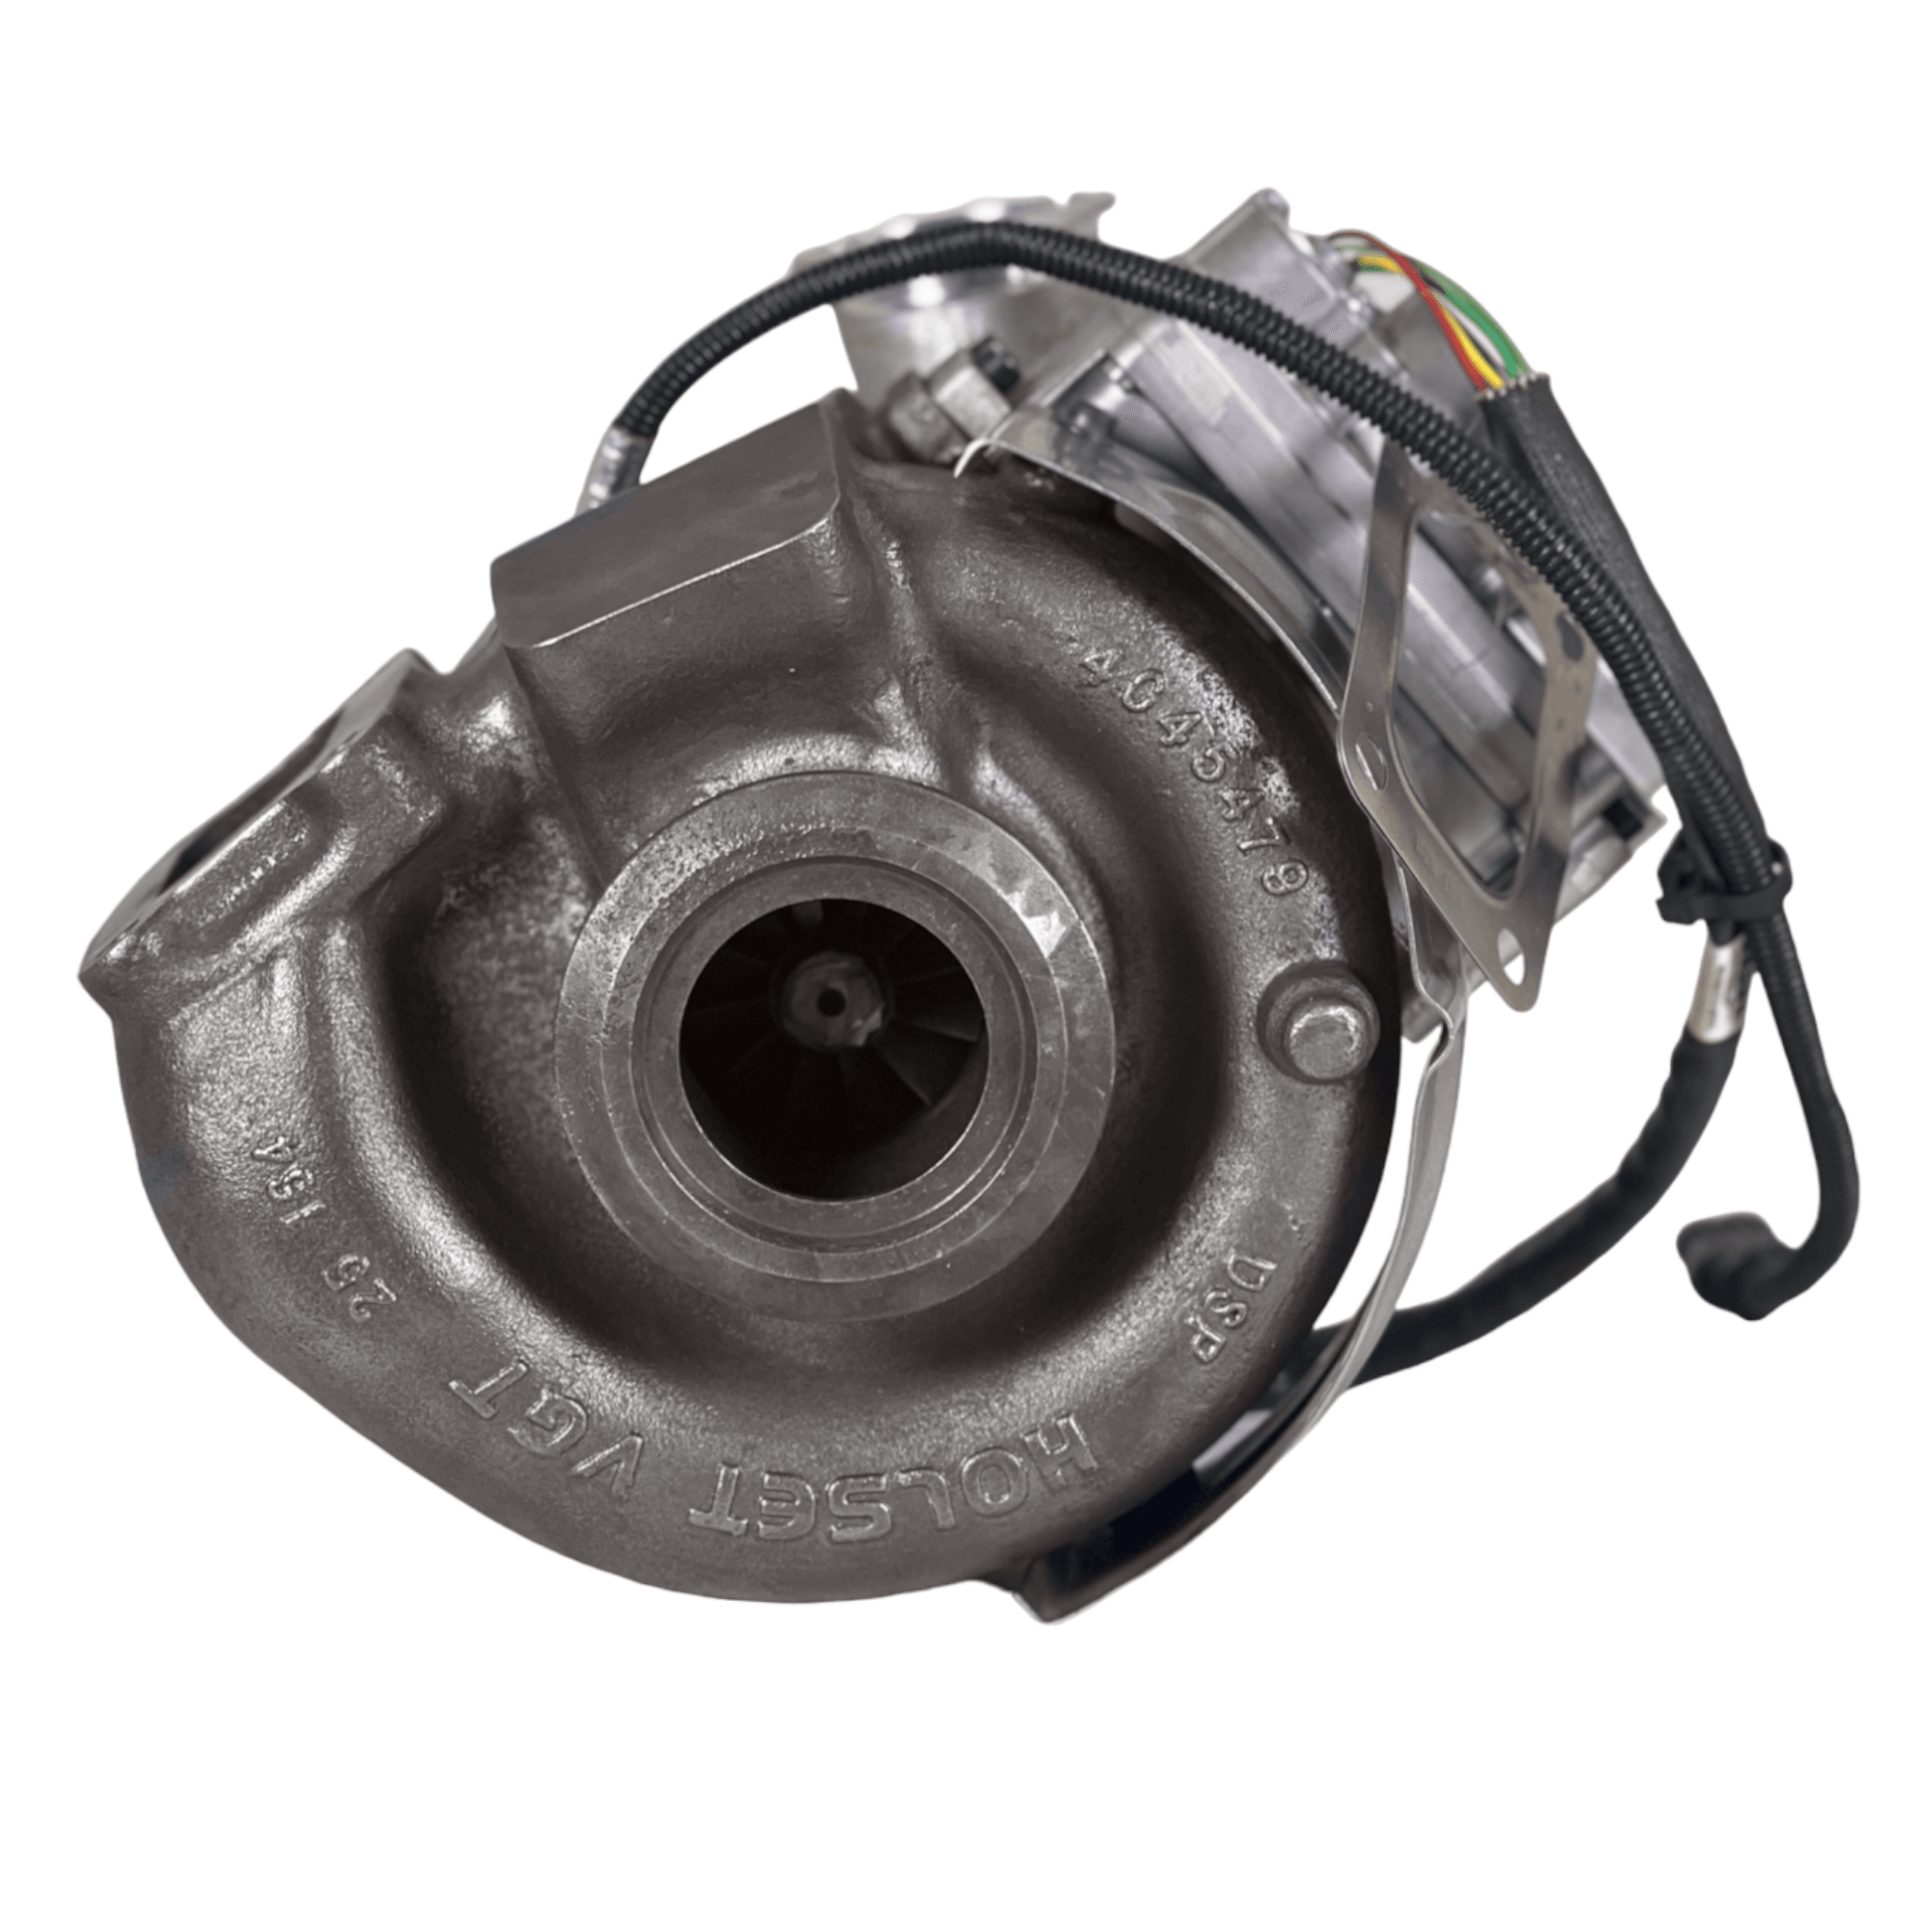 4955539 Genuine Cummins® He351Ve Turbocharger Kit With Actuator For Isb 6.7L - ADVANCED TRUCK PARTS